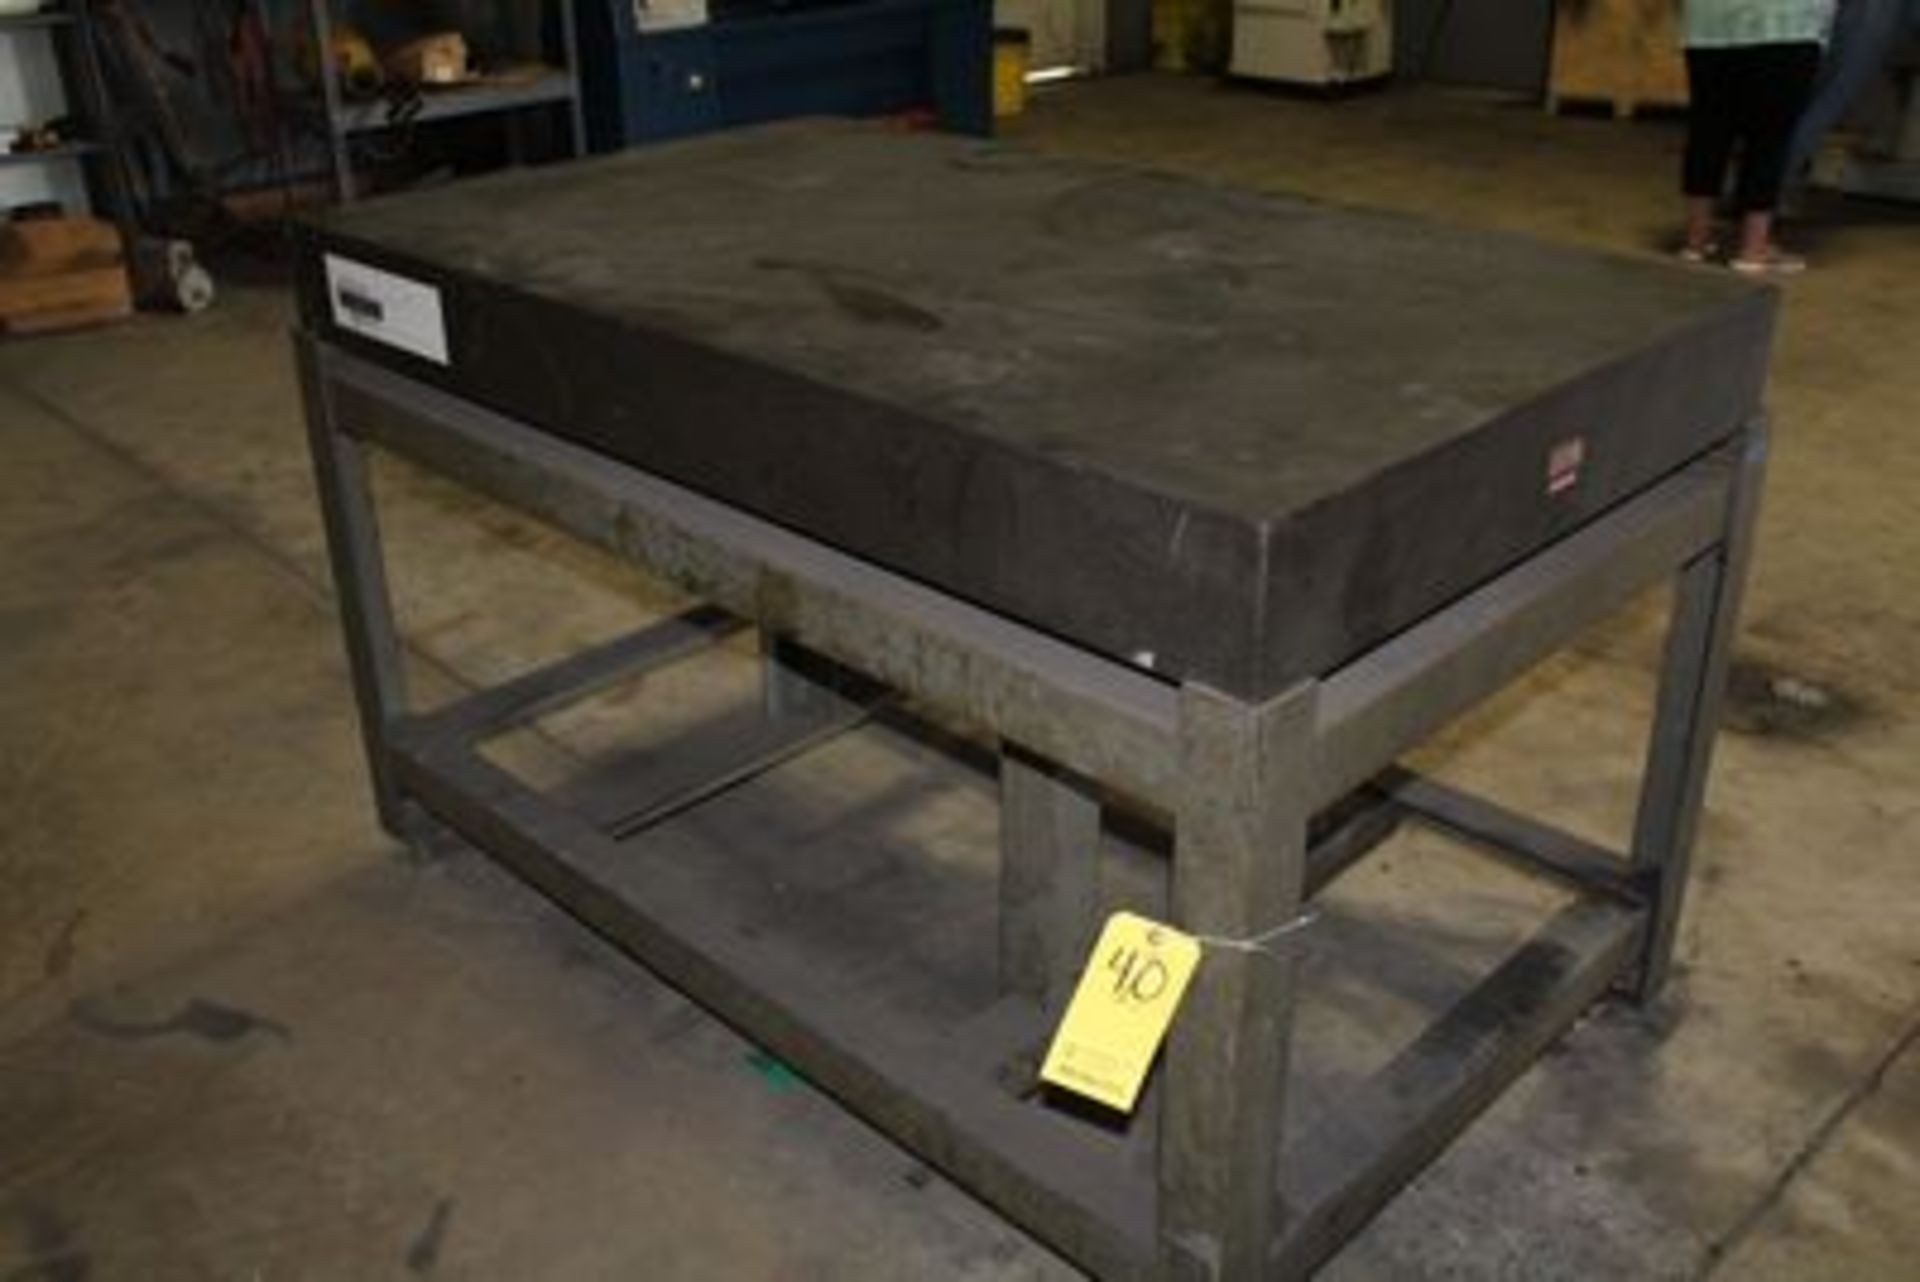 GREY GRANITE SURFACE TABLE, 3' X 5' X 6", W/ STANDS (LOCATION 1: 1308 LE GILLILAND DR, TEXARKANA, AR